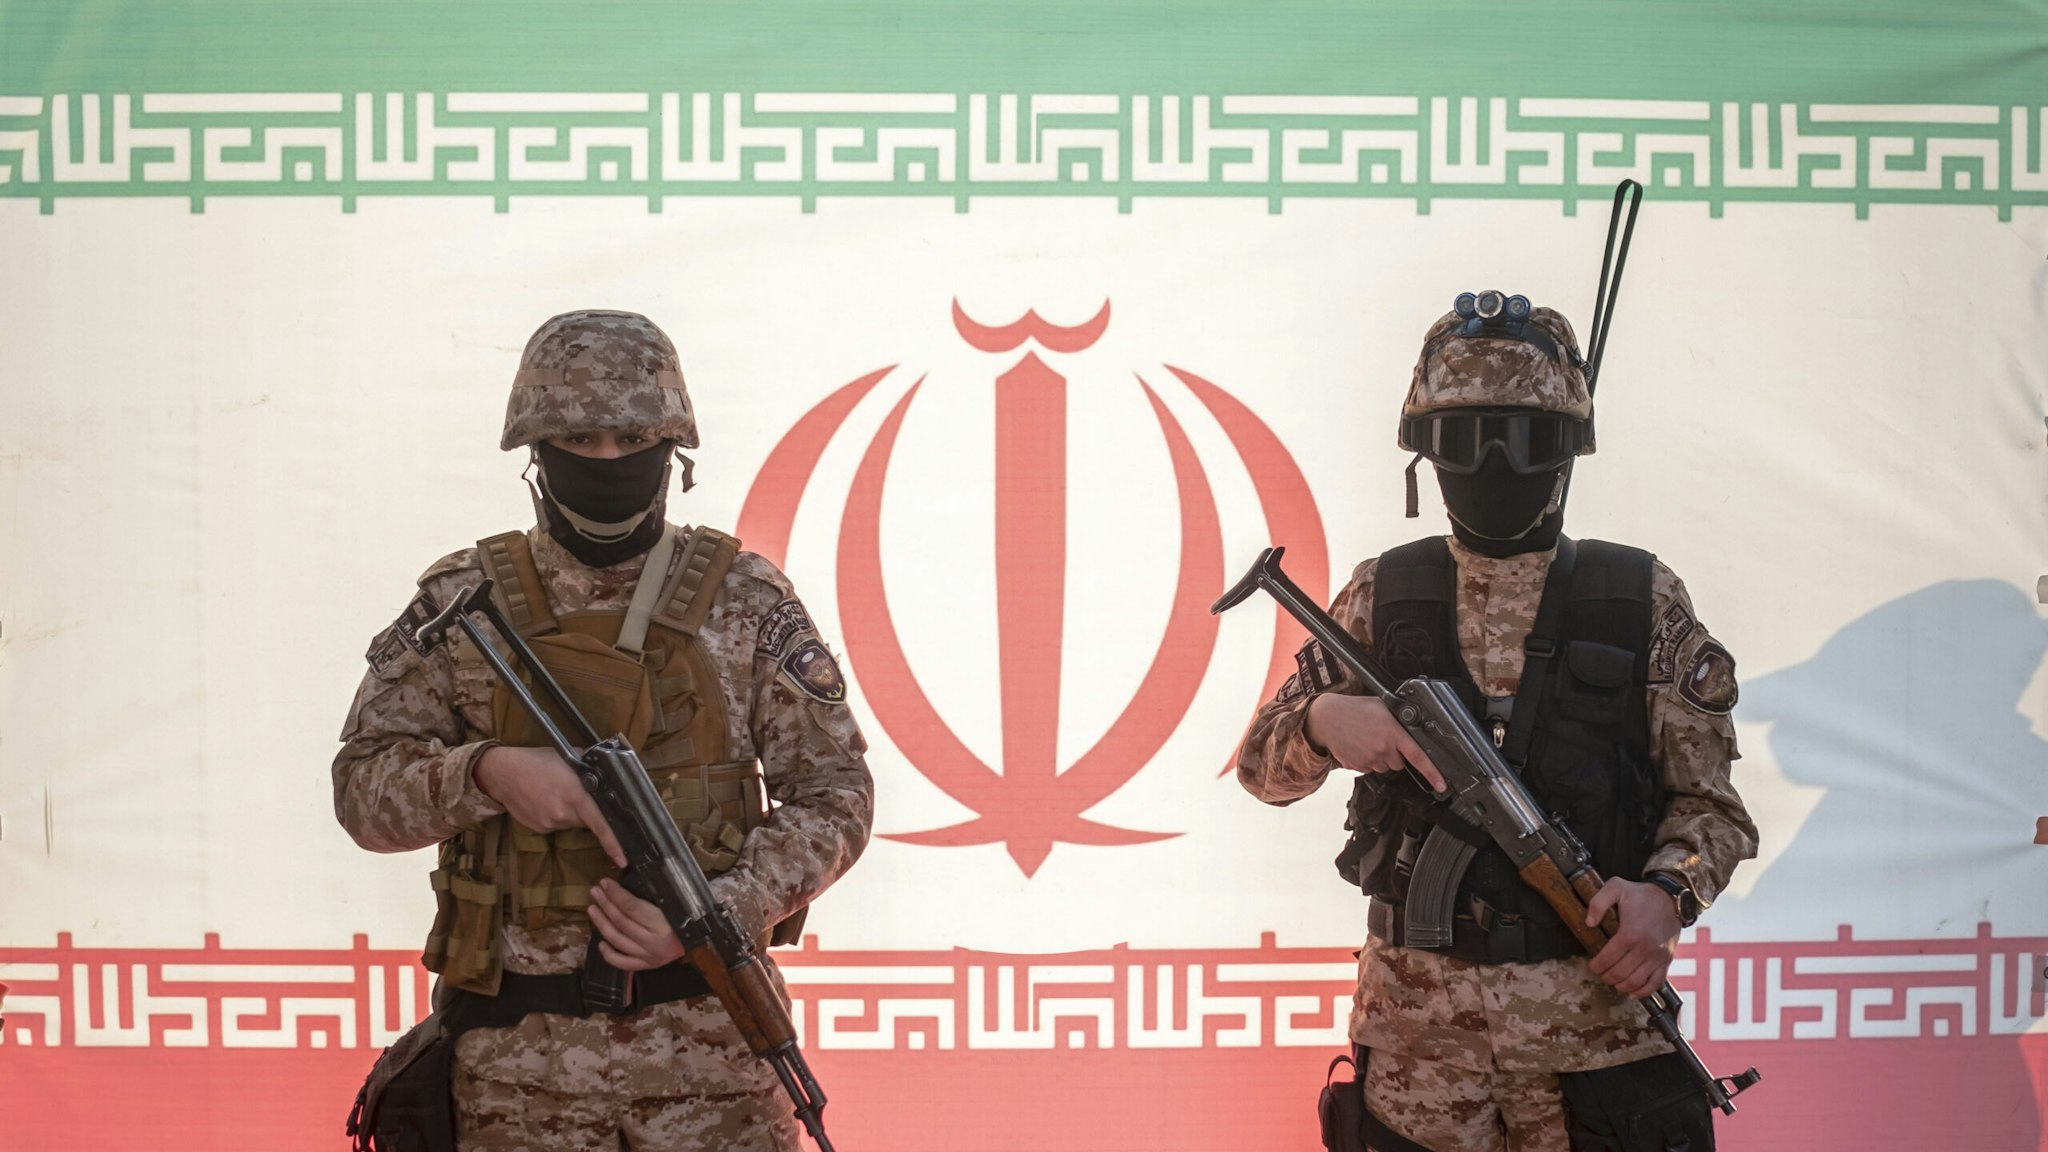 Two Islamic Revolutionary Guard Corps (IRGC) armed military personnel pose for a photograph in front of an Iran flag during a pro-government protest rally in southern Tehran, December 29, 2022. Pro-government protest rally held in support of Iran's Supreme Leader Ayatollah Ali Khamenei and in opposition to recent unrest following the death of Mahsa Amini, a 21-year-old Iranian-Kurd.